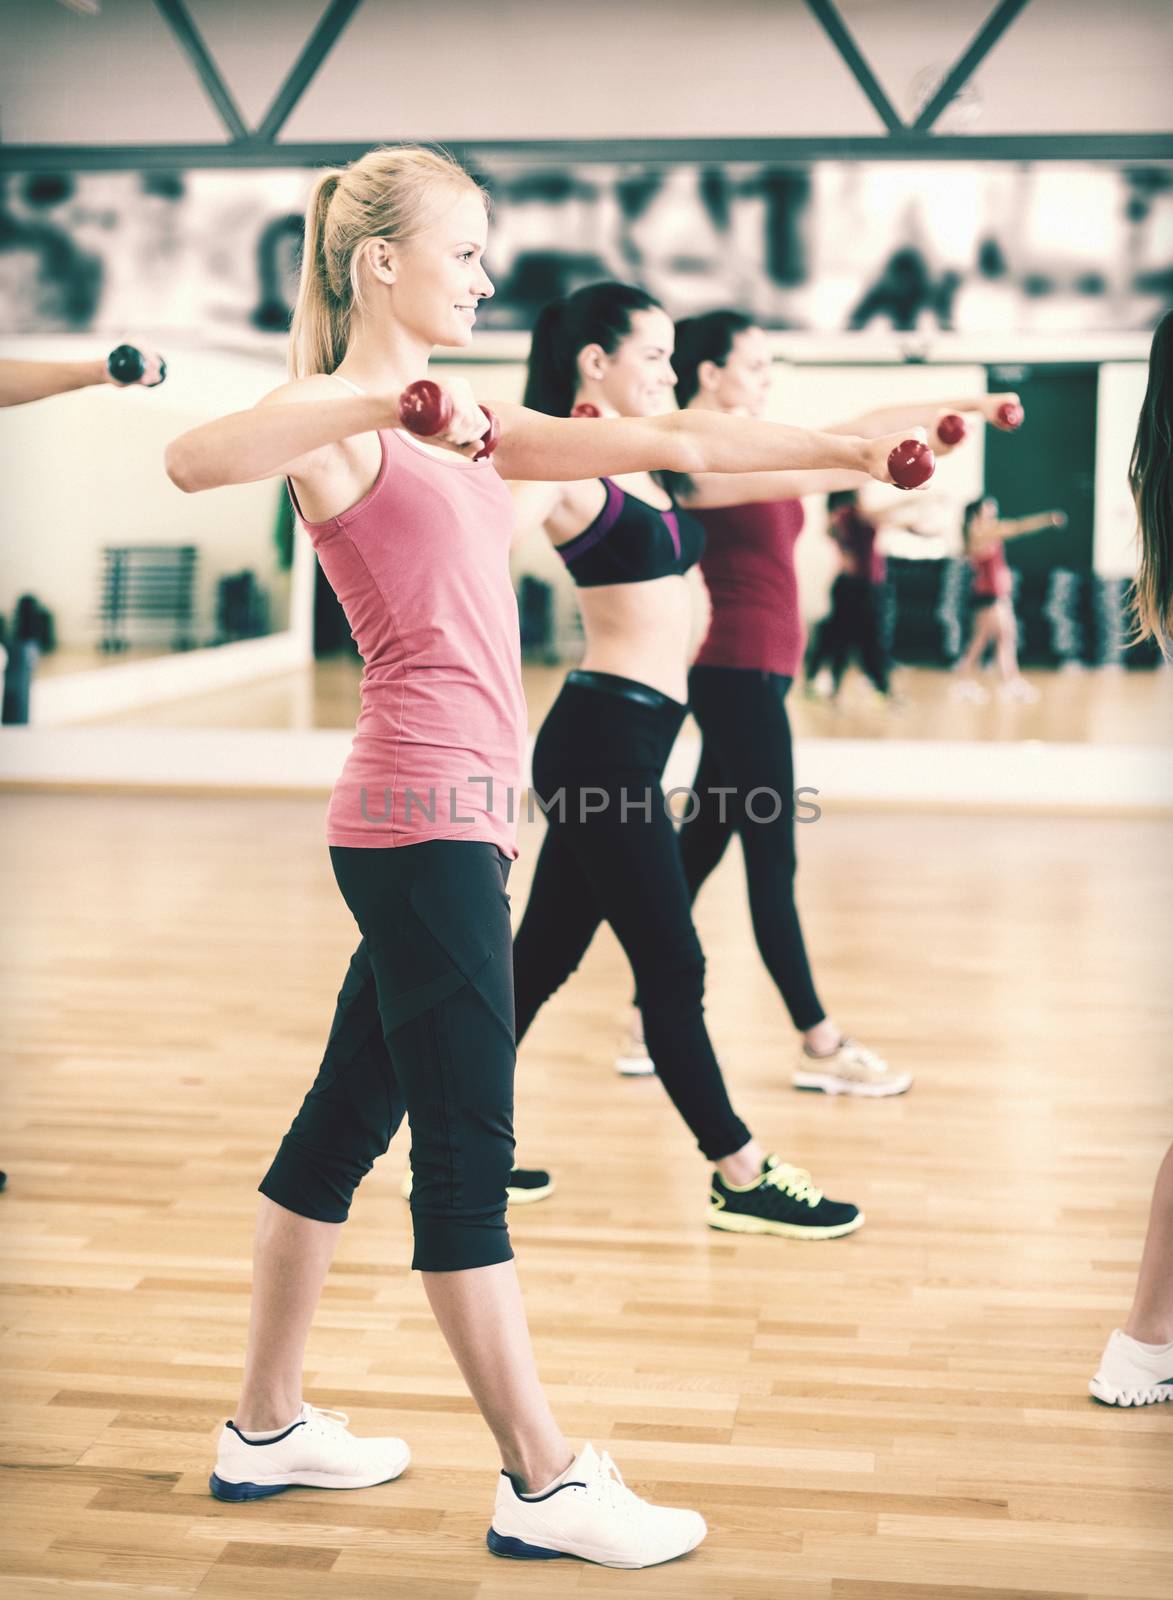 group of smiling people working out with dumbbells by dolgachov